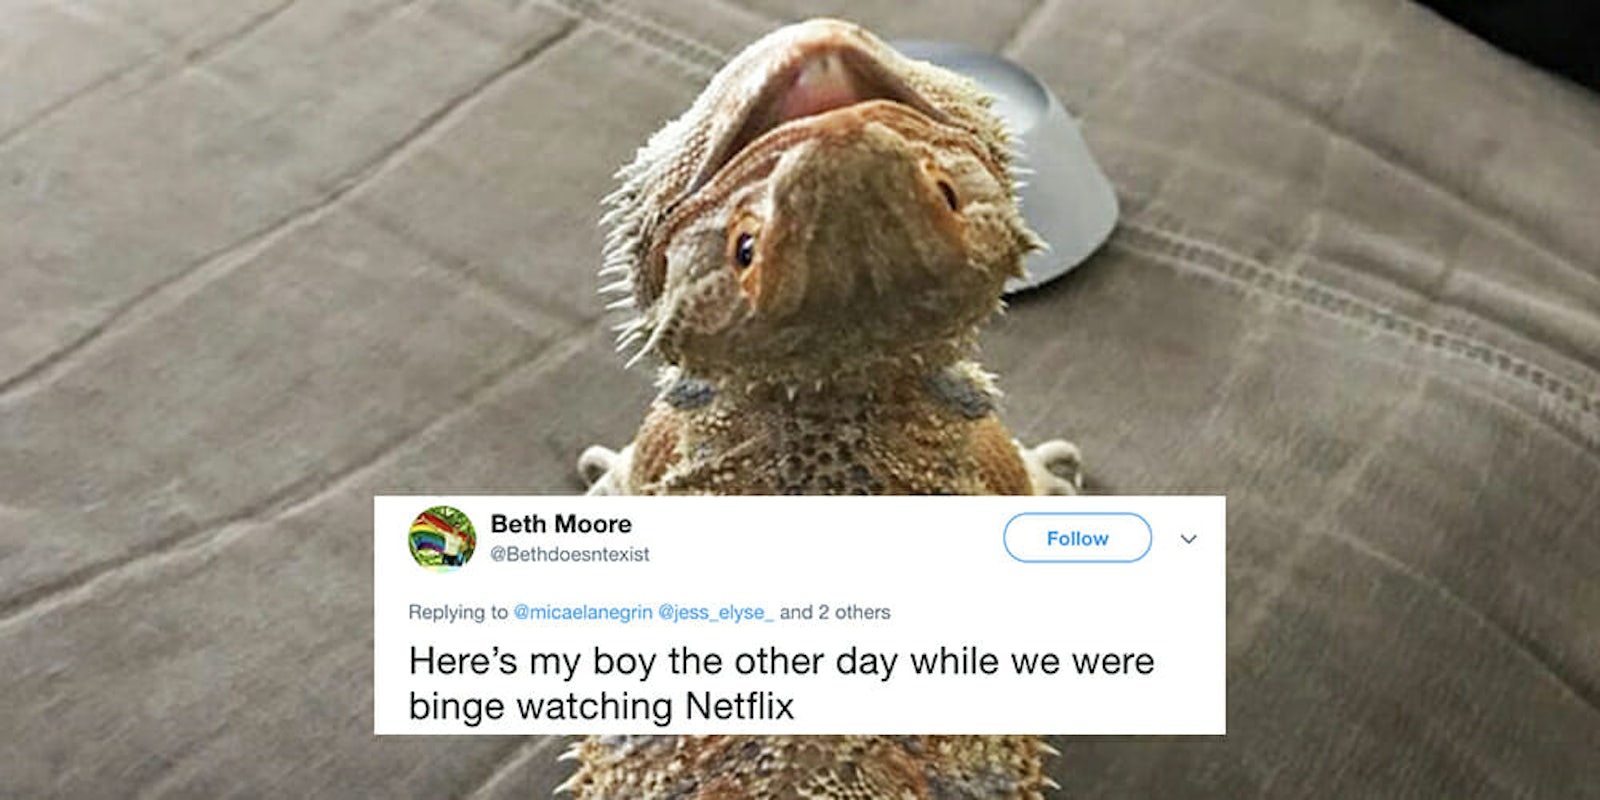 Bearded dragon dates are superior to human dates, according to Twitter.